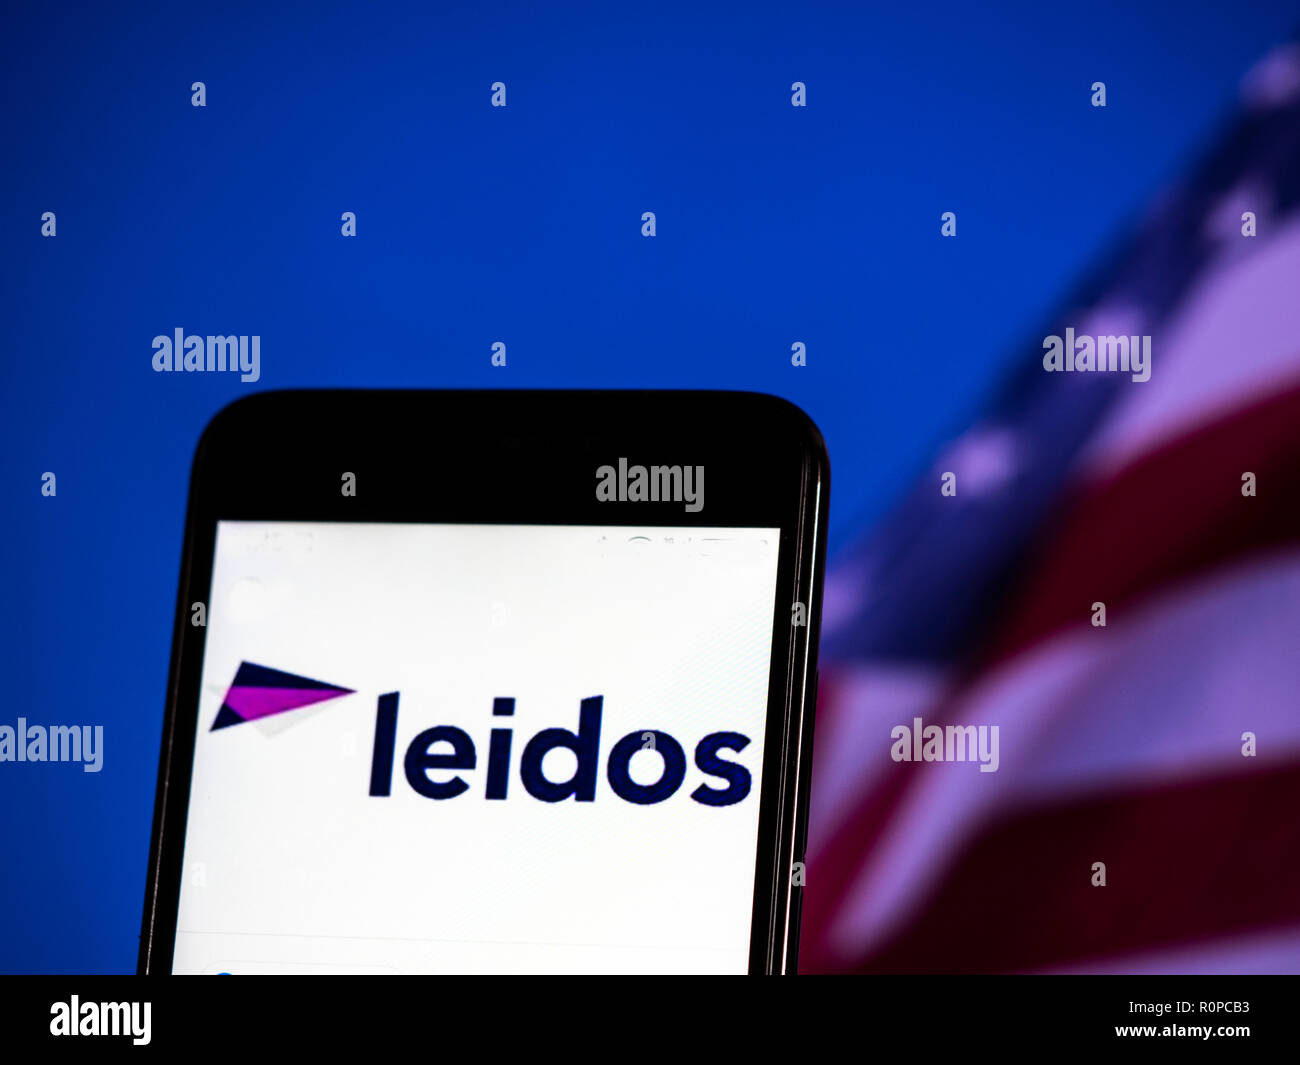 Leidos Scientific research company logo seen displayed on smart phone. Leidos, formerly known as Science Applications International Corporation, is an American defense, aviation, information technology, and biomedical research company, that provides scientific, engineering, systems integration, and technical services Stock Photo